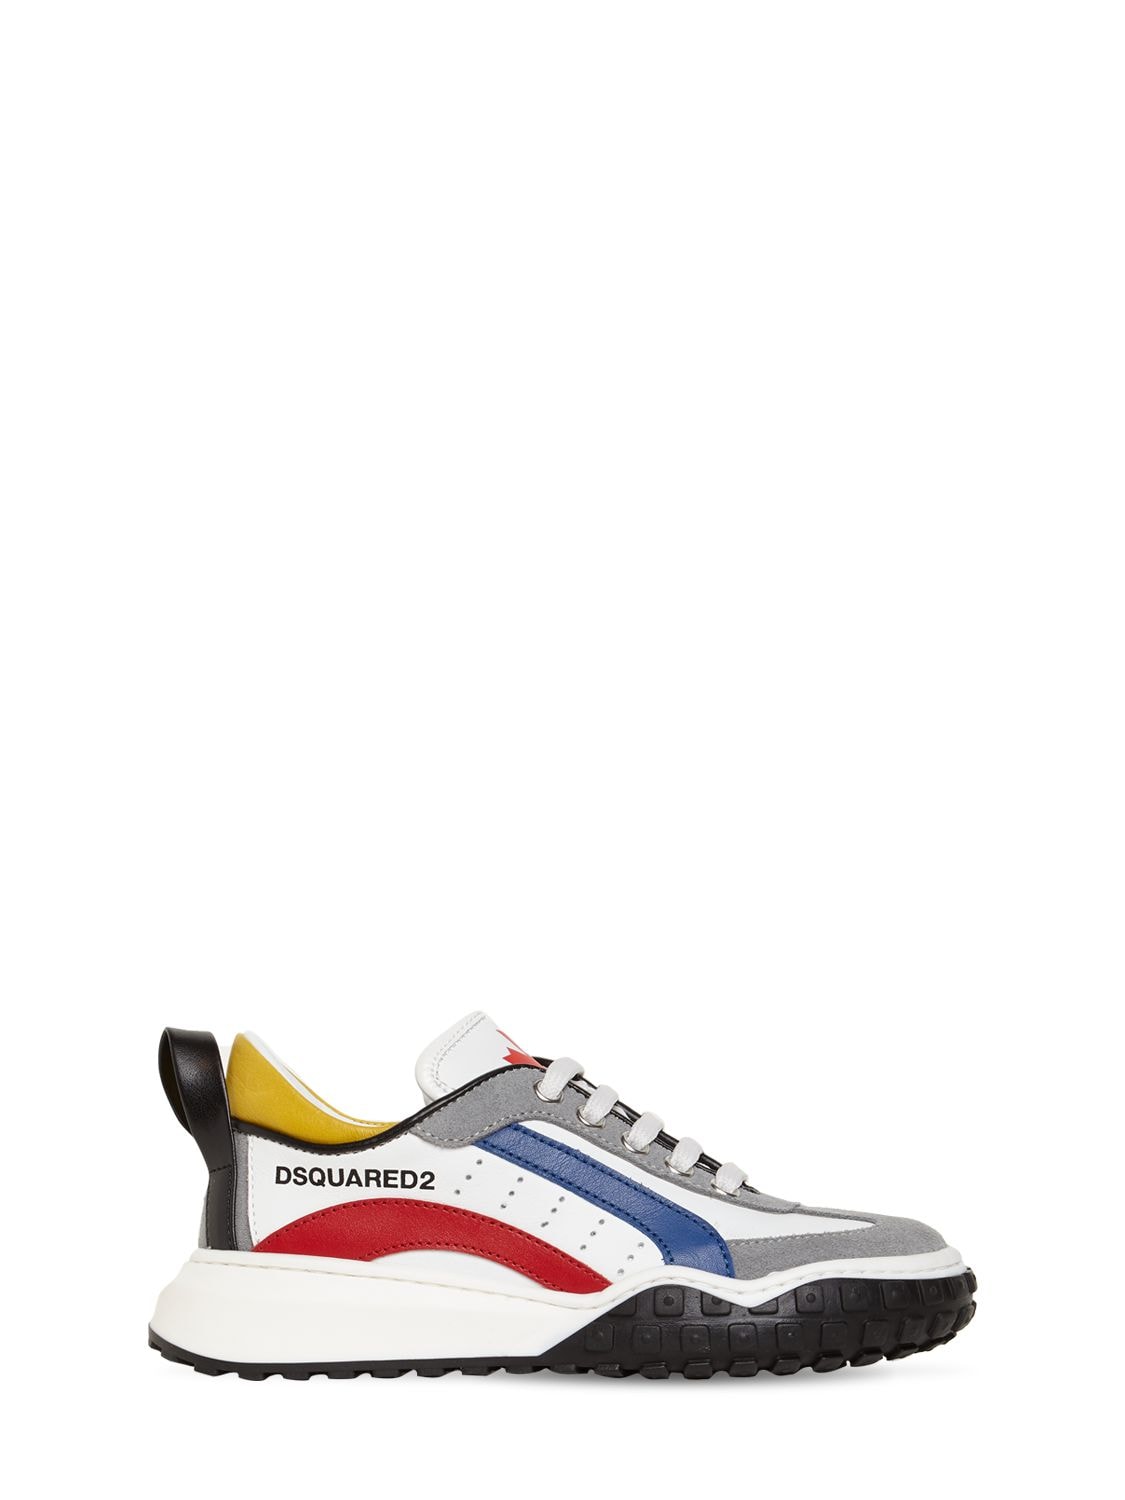 DSQUARED2 LOGO LACE-UP LEATHER & SUEDE SNEAKERS,74I91X011-VKFSIDE1